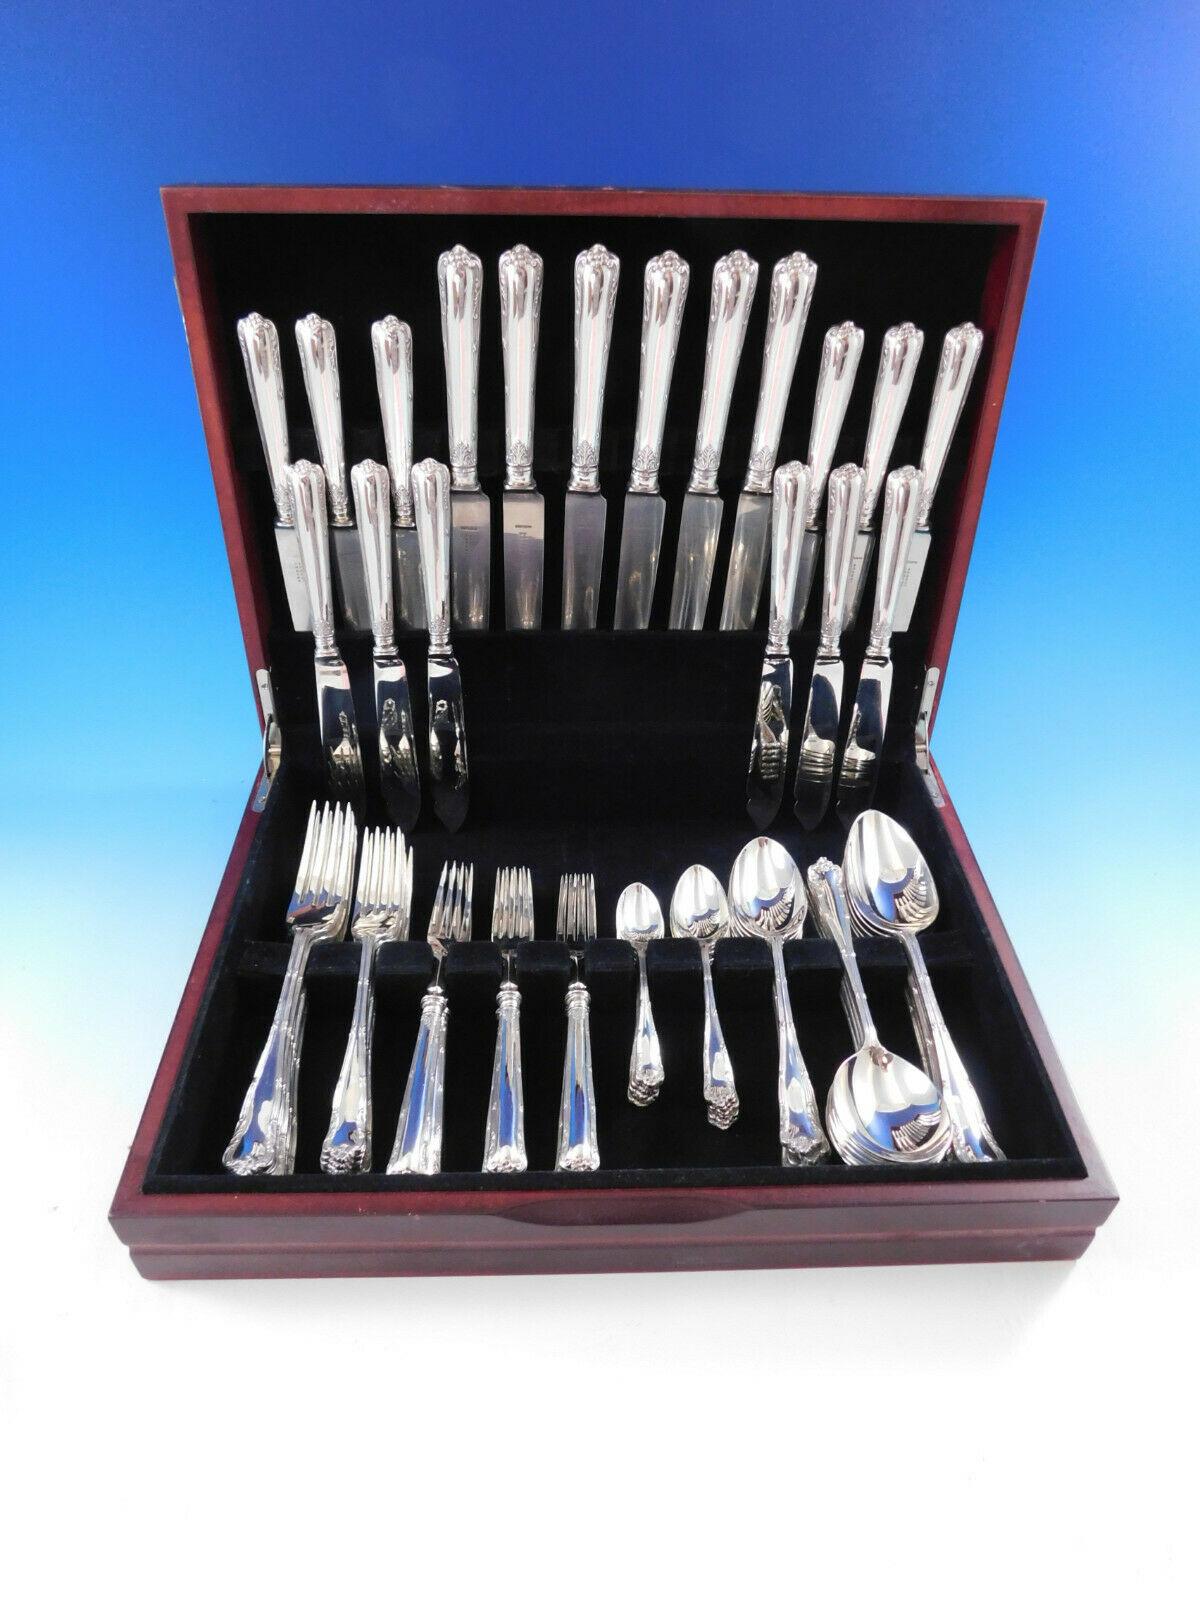 Exceptional Asprey English sterling silver flatware set, 66 pieces. This set includes:

6 dinner size knives, 9 3/4